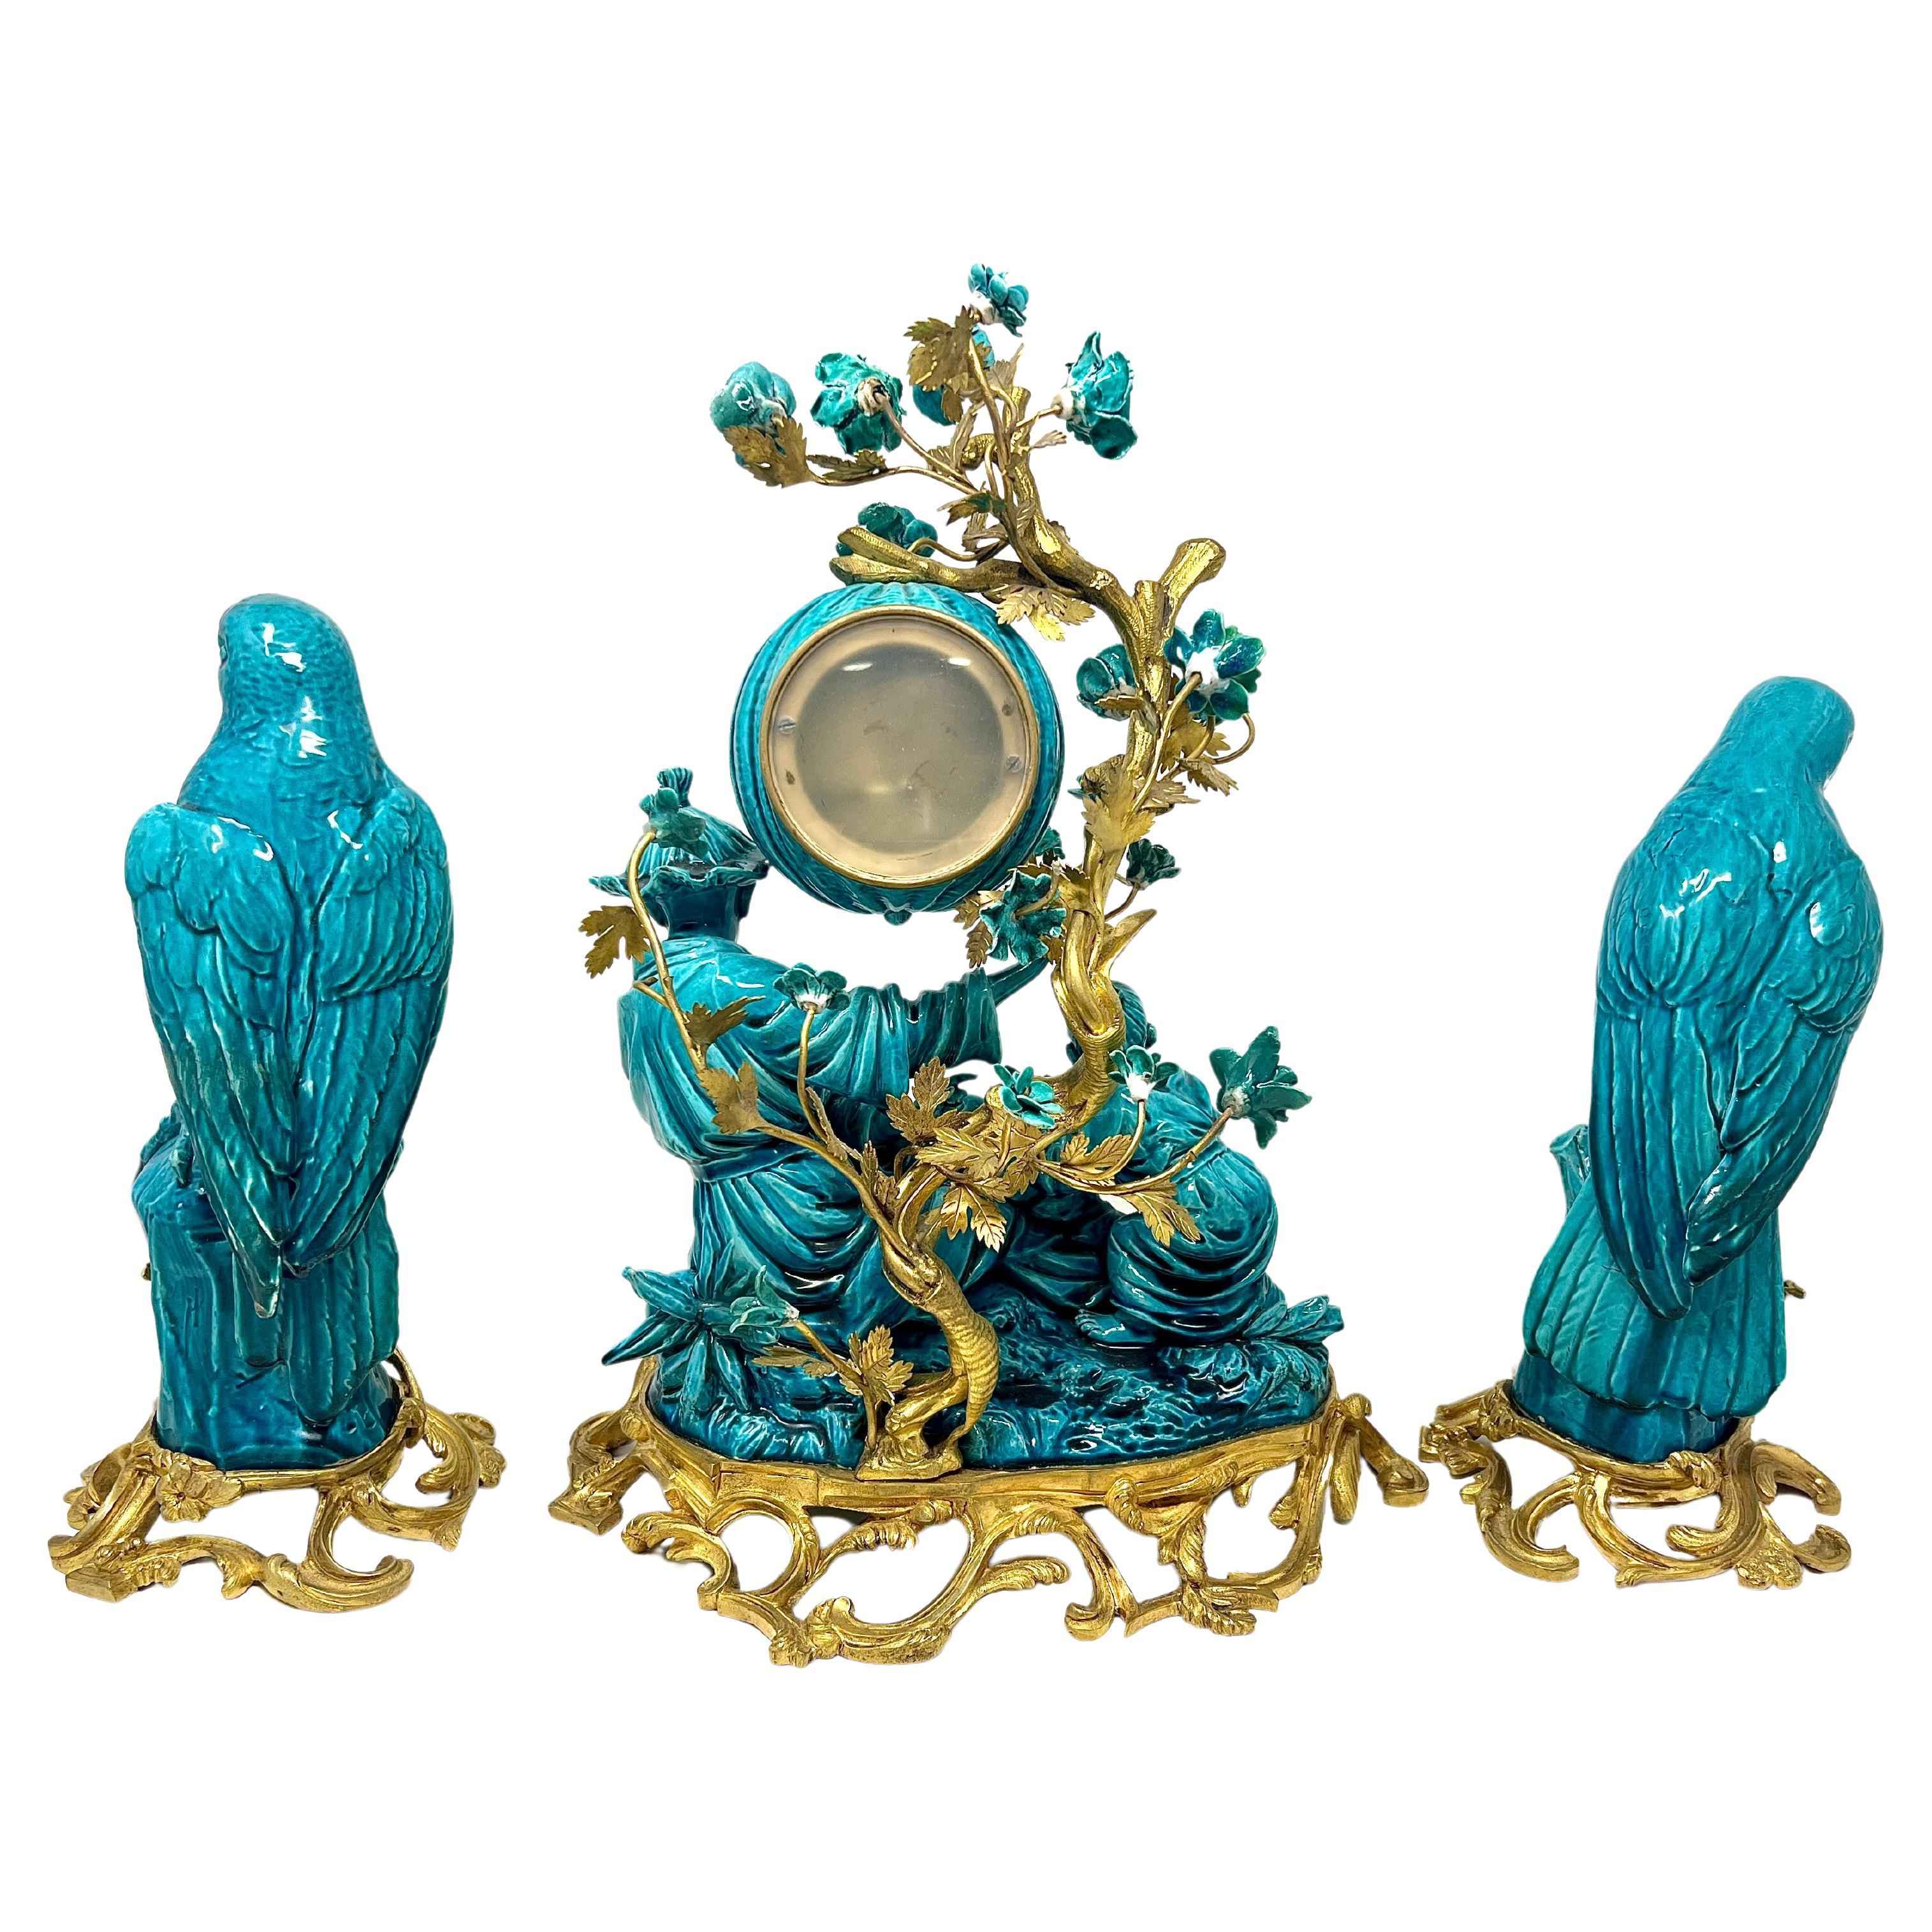 Wonderful Antique French Chinoiserie Style Gold Bronze & Turquoise Glazed Porcelain 3 Piece Garniture Clock Set, Circa 1890's-1900.
Clock: 16 inches in height x 11 inches in width x 9 inches in depth 
Birds: 12 inches in height x 6 inches in width x